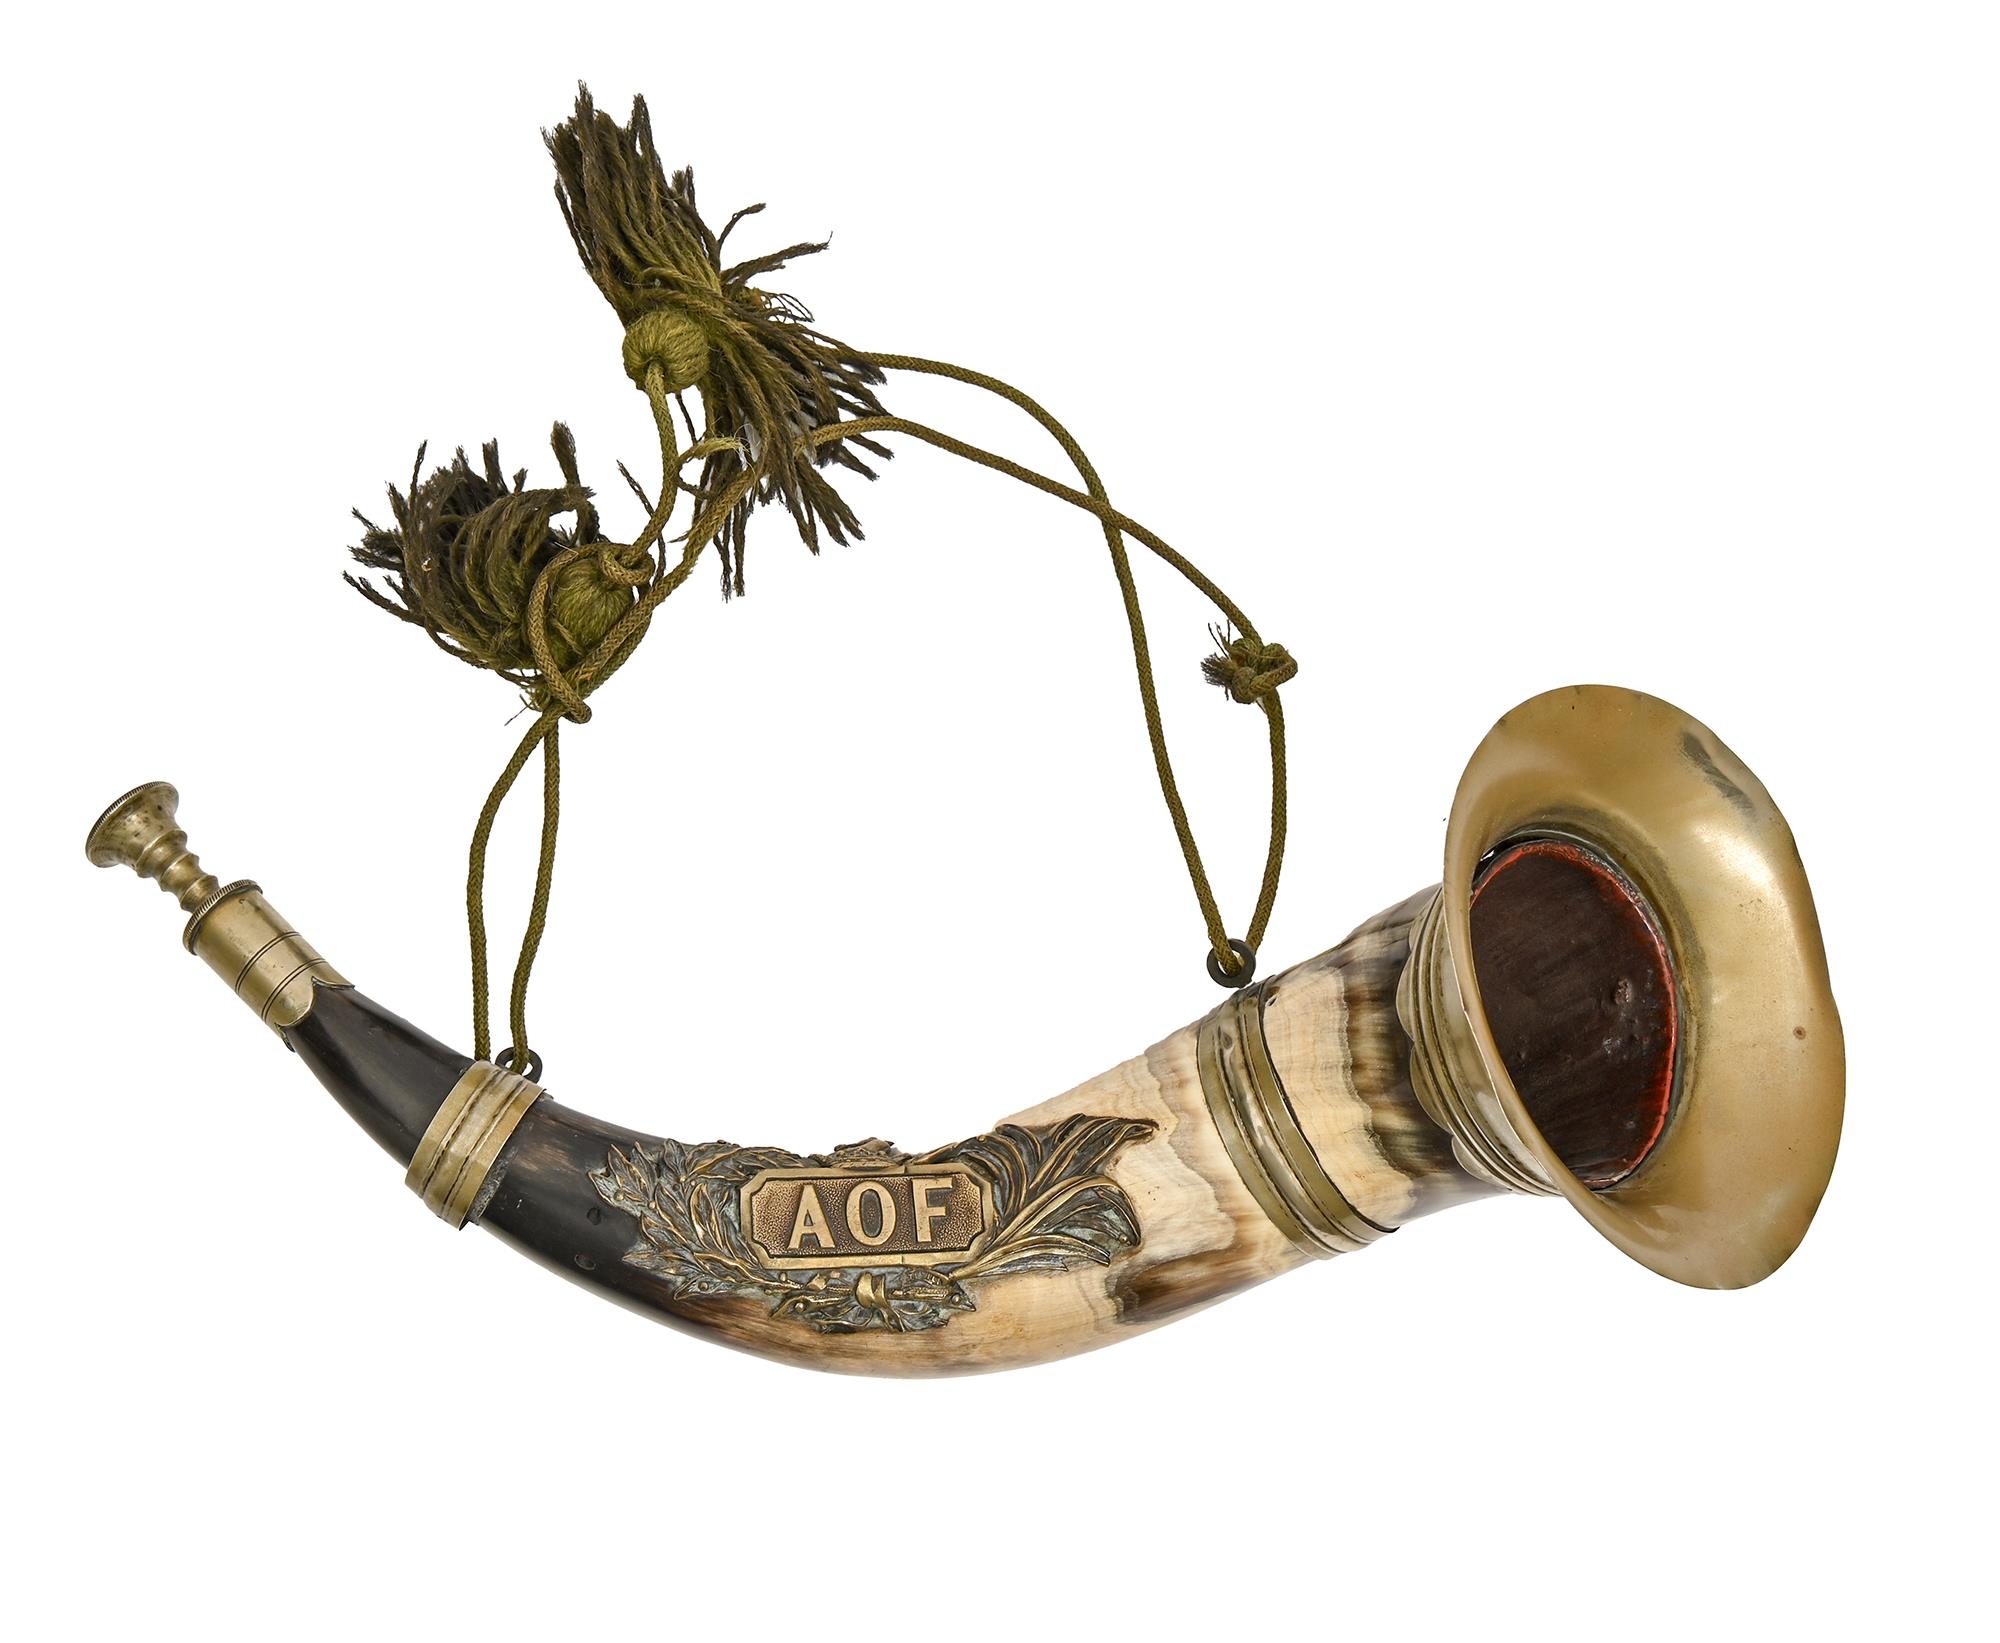 Victorian Friendly Societies. A brass and nickel plated brass mounted horn of the Ancient Order of